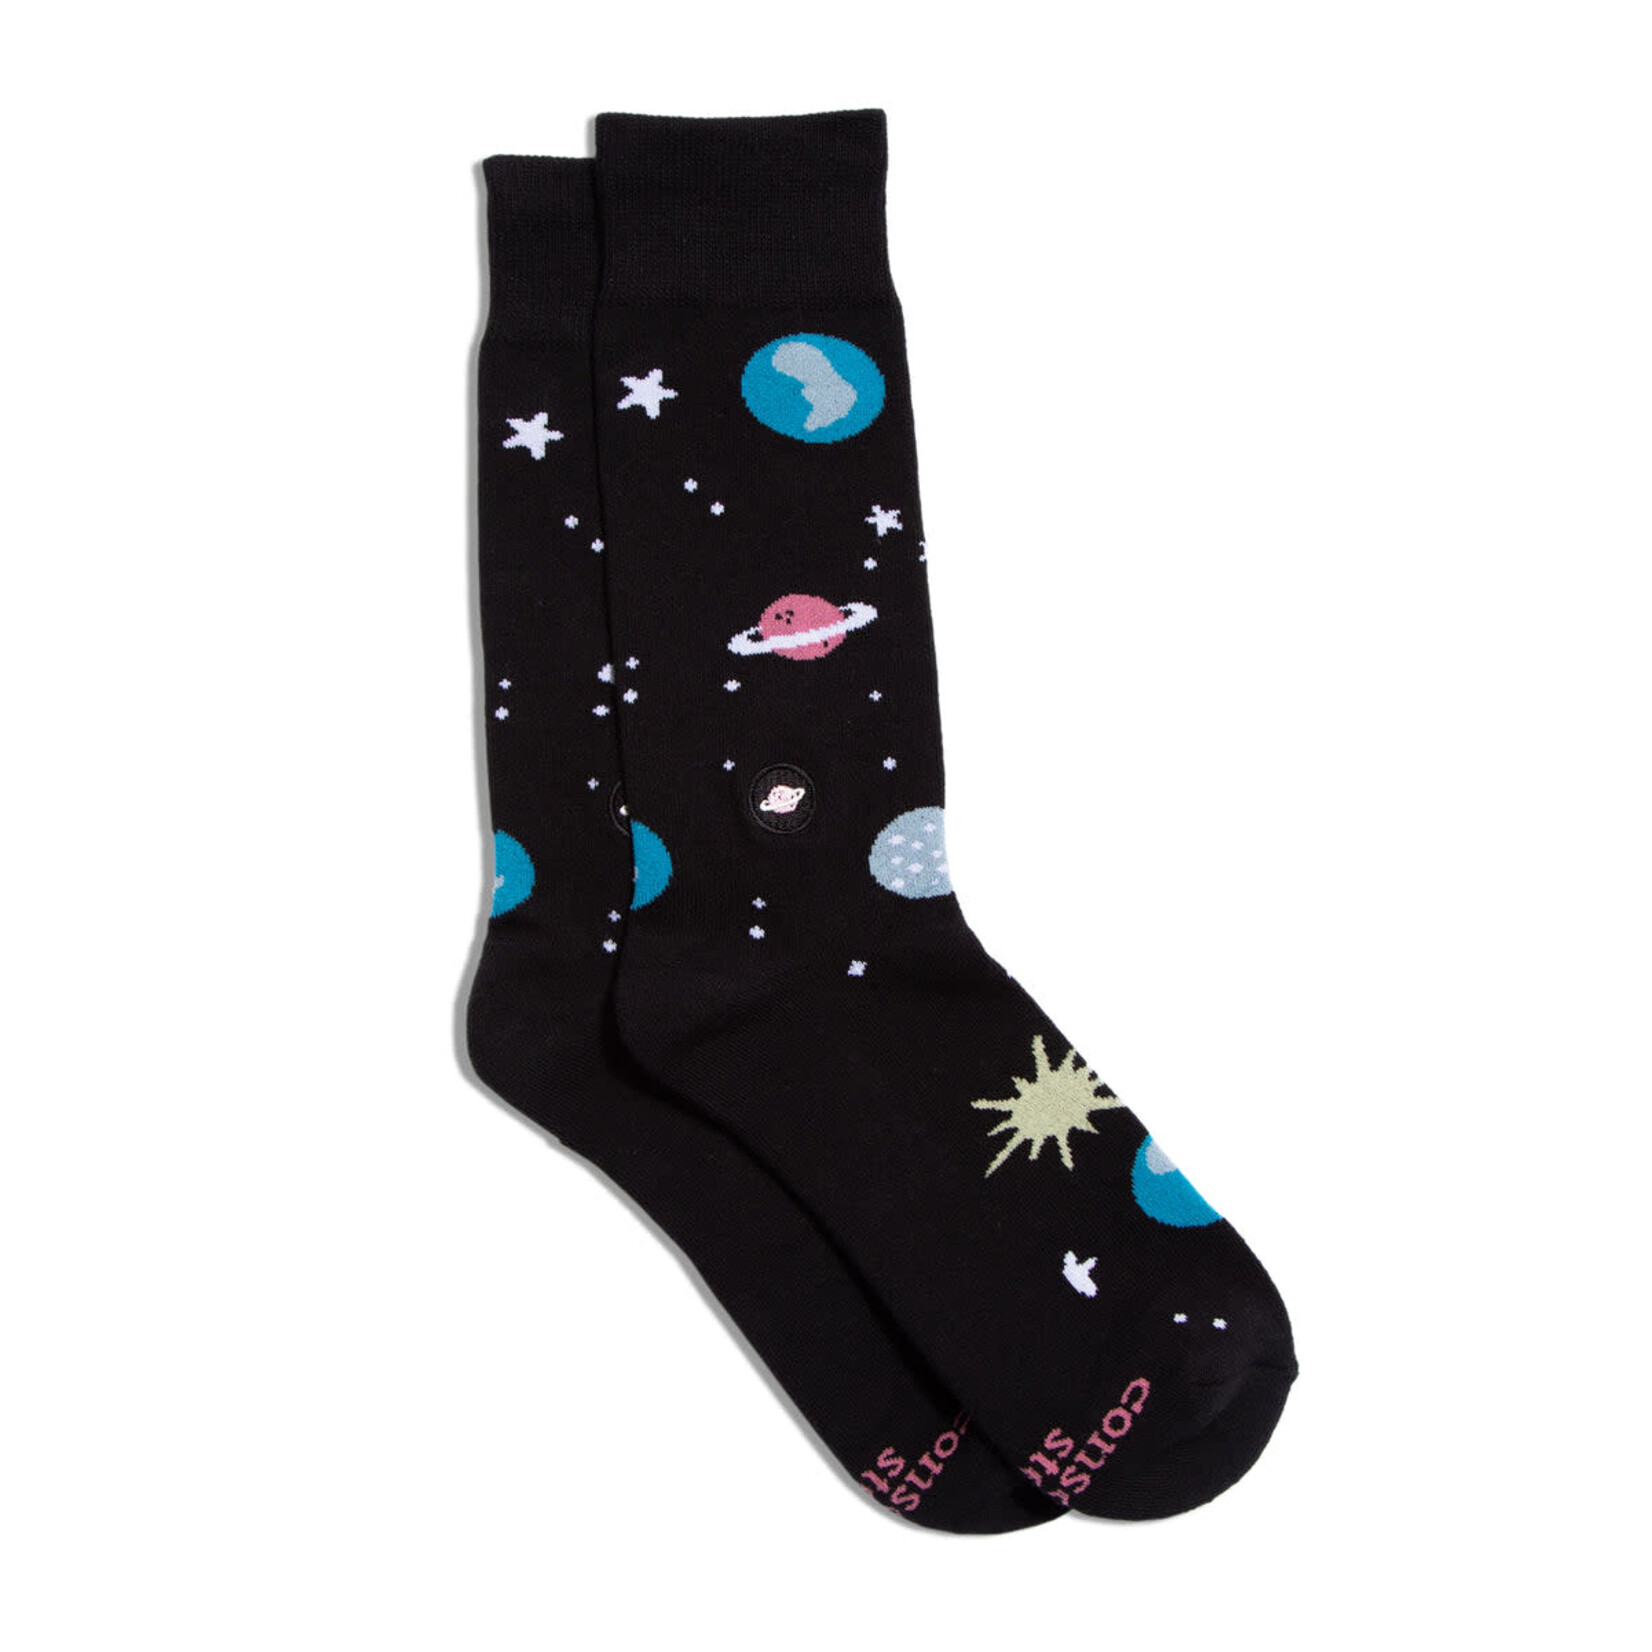 Conscious Step Conscious Step Socks Support Space Exploration, Black, Small